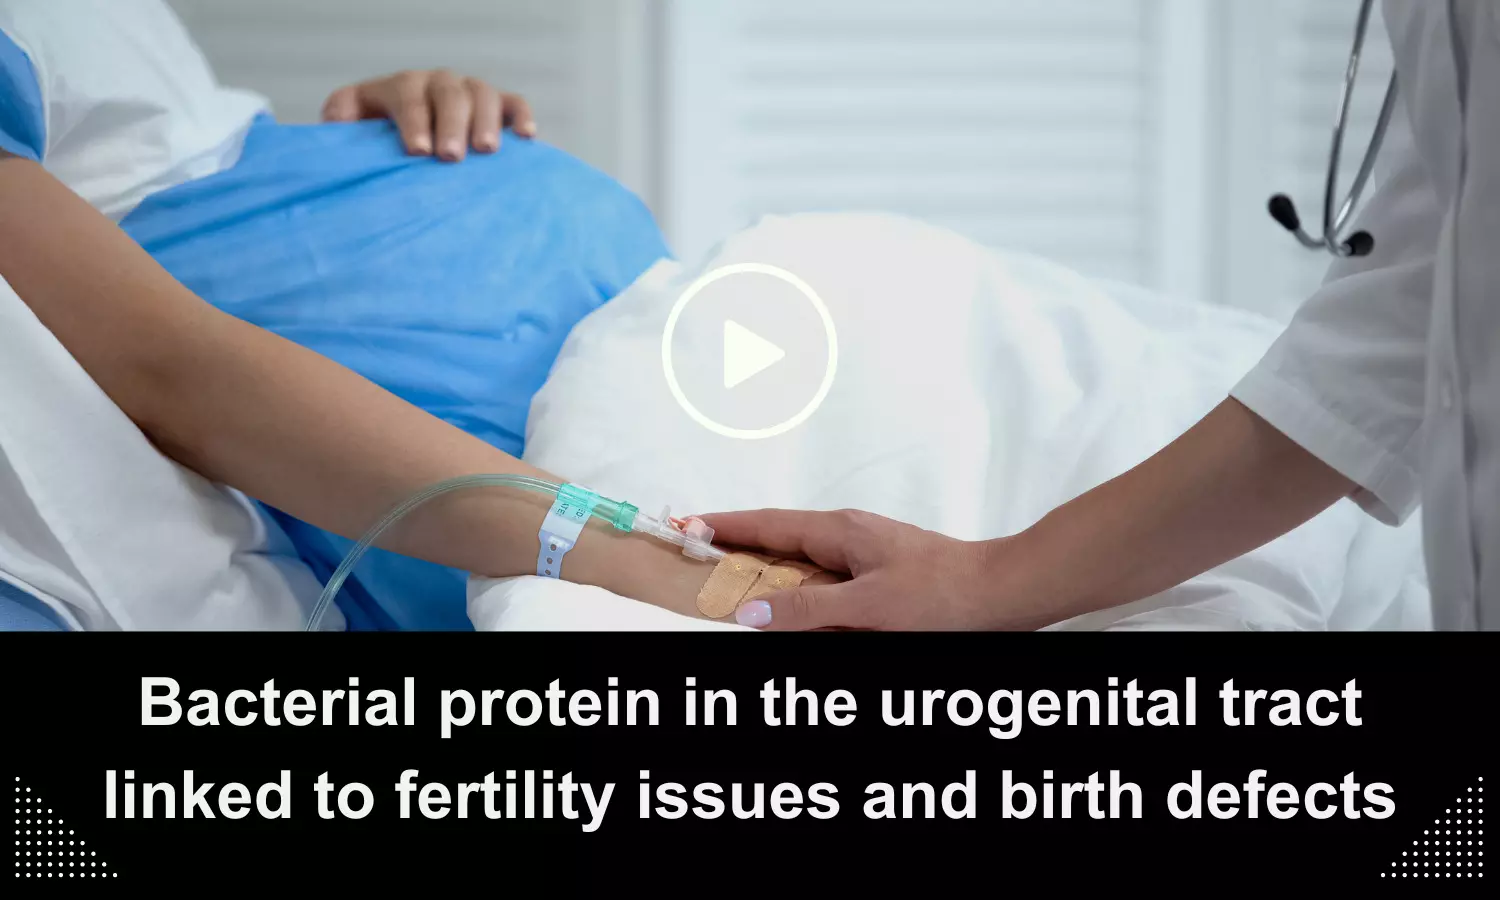 Bacterial protein in the urogenital tract linked to fertility issues and birth defects